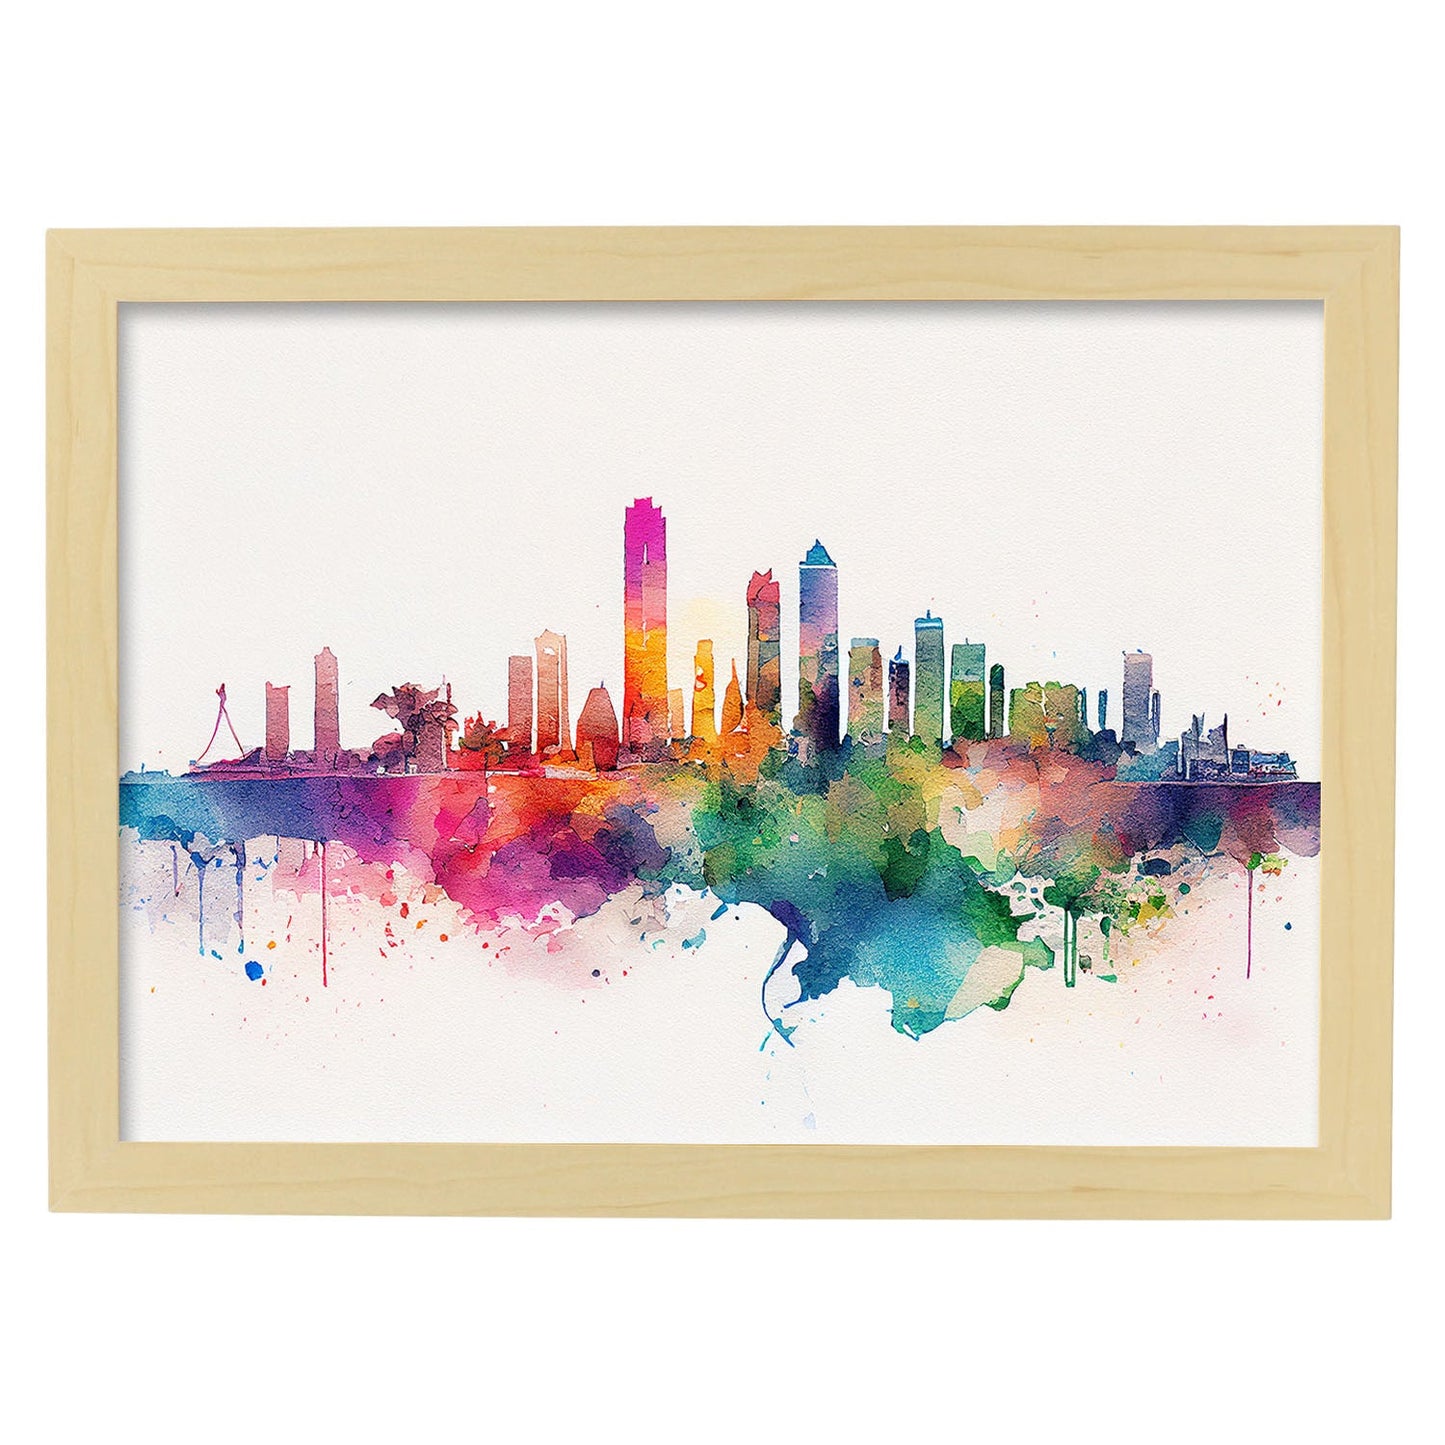 Nacnic watercolor of a skyline of the city of Tel Aviv_1. Aesthetic Wall Art Prints for Bedroom or Living Room Design.-Artwork-Nacnic-A4-Marco Madera Clara-Nacnic Estudio SL